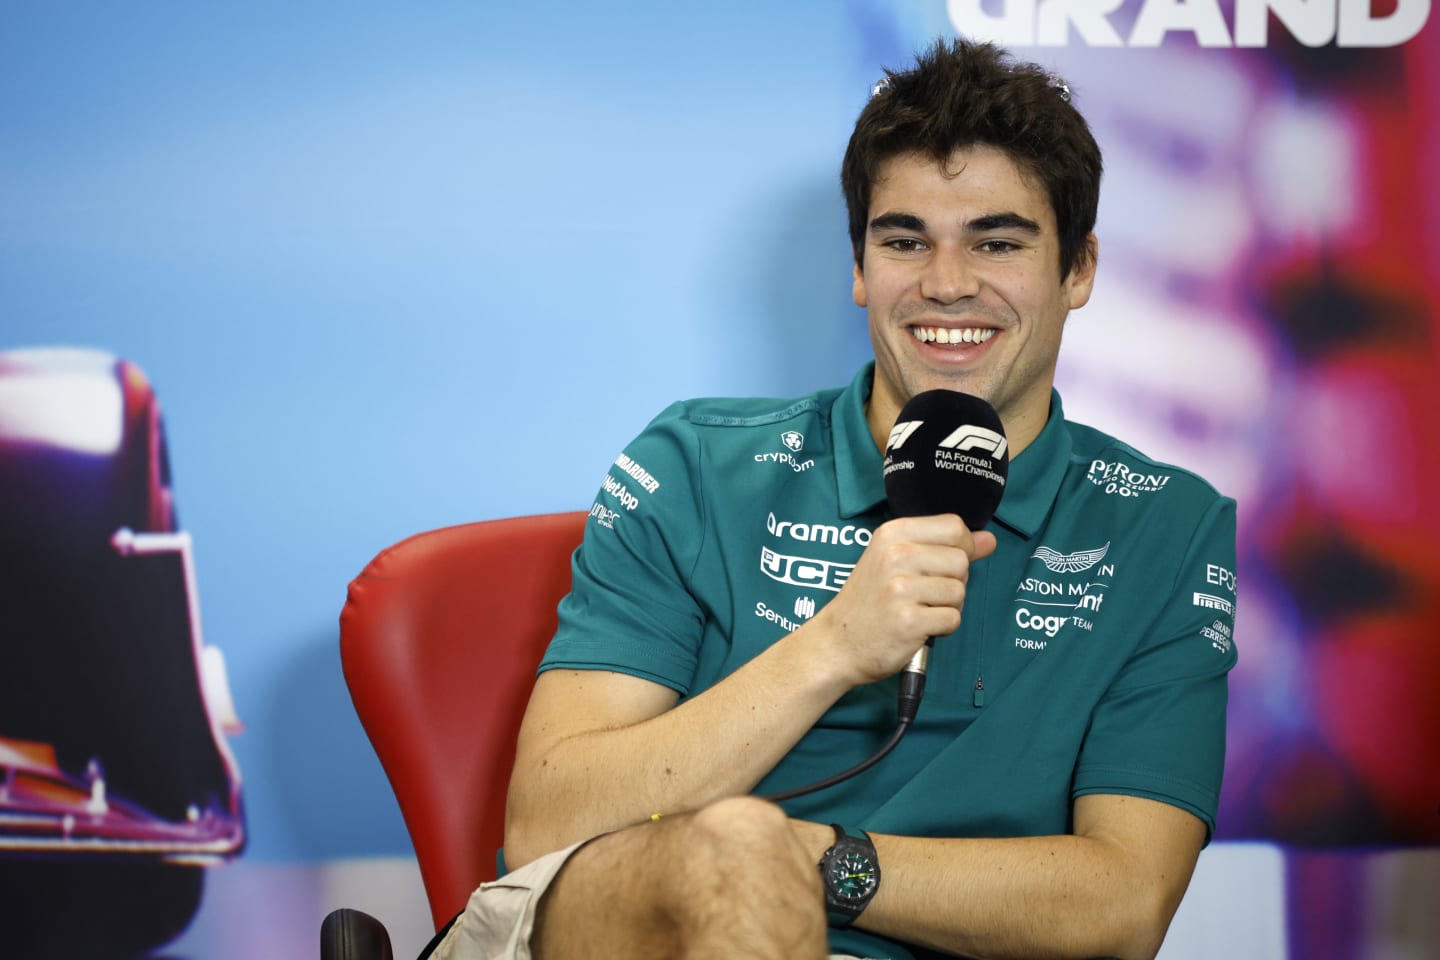 AUSTIN, TEXAS - OCTOBER 20: Lance Stroll of Canada and Aston Martin F1 Team attends the Drivers Press Conference during previews ahead of the F1 Grand Prix of USA at Circuit of The Americas on October 20, 2022 in Austin, Texas. (Photo by Jared C. Tilton/Getty Images)